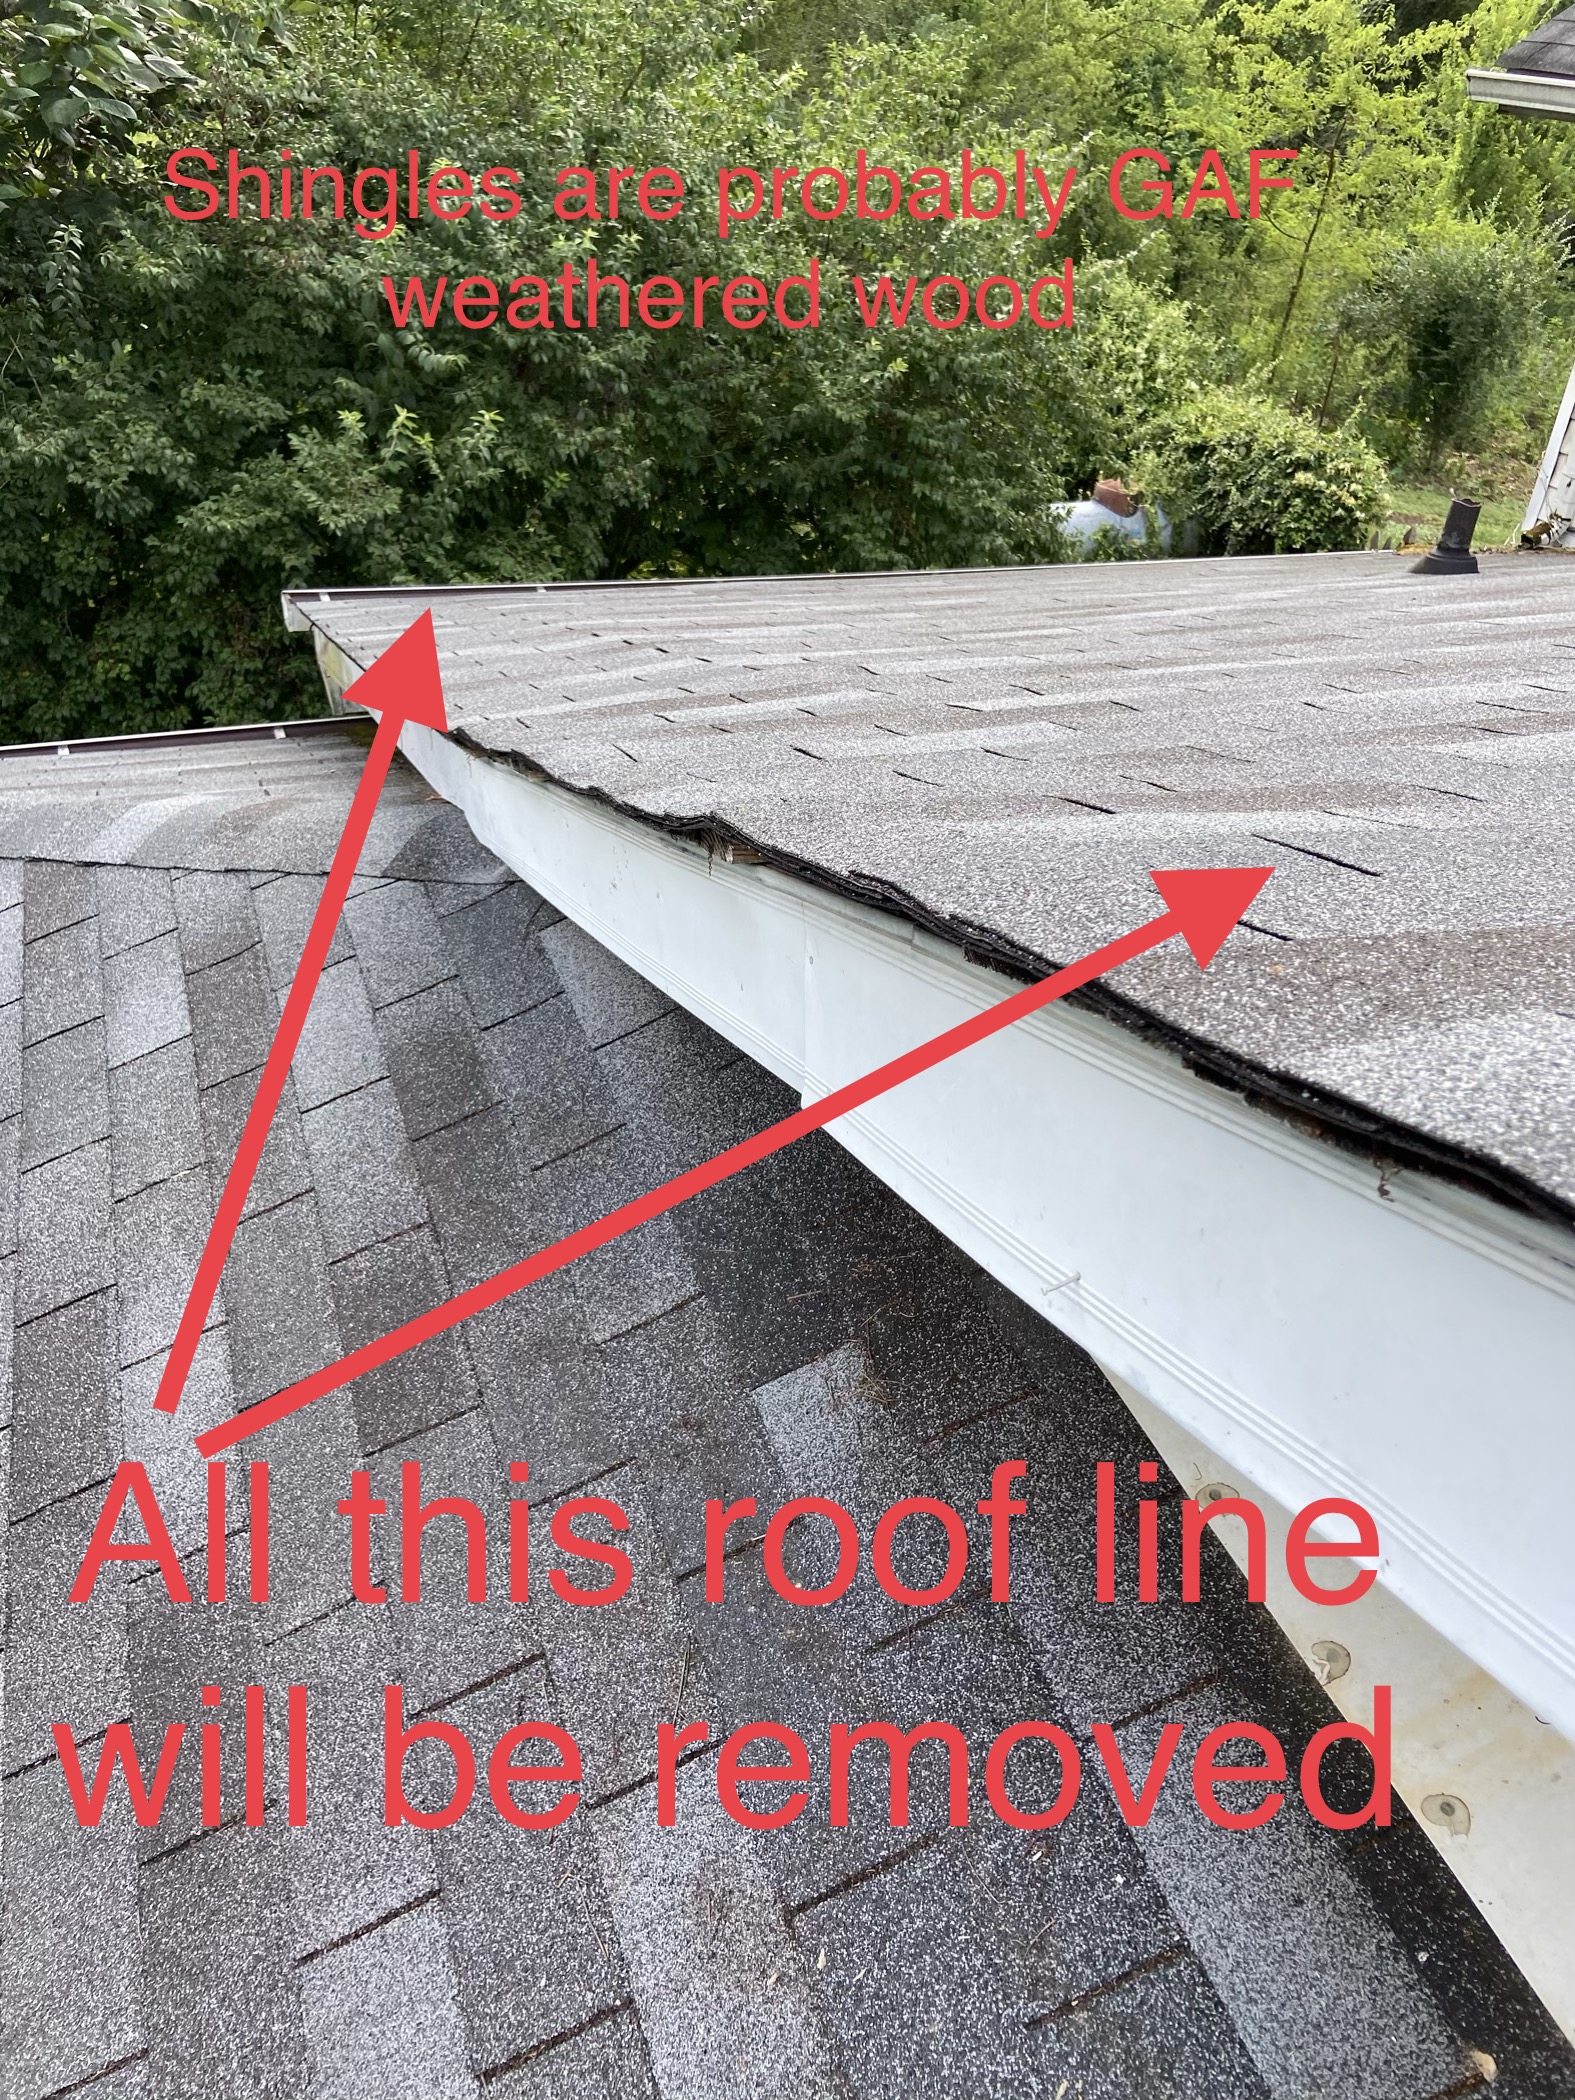 this is a picture of the roof slope mentioning via text in the photo that this entire roof line will need to be removed